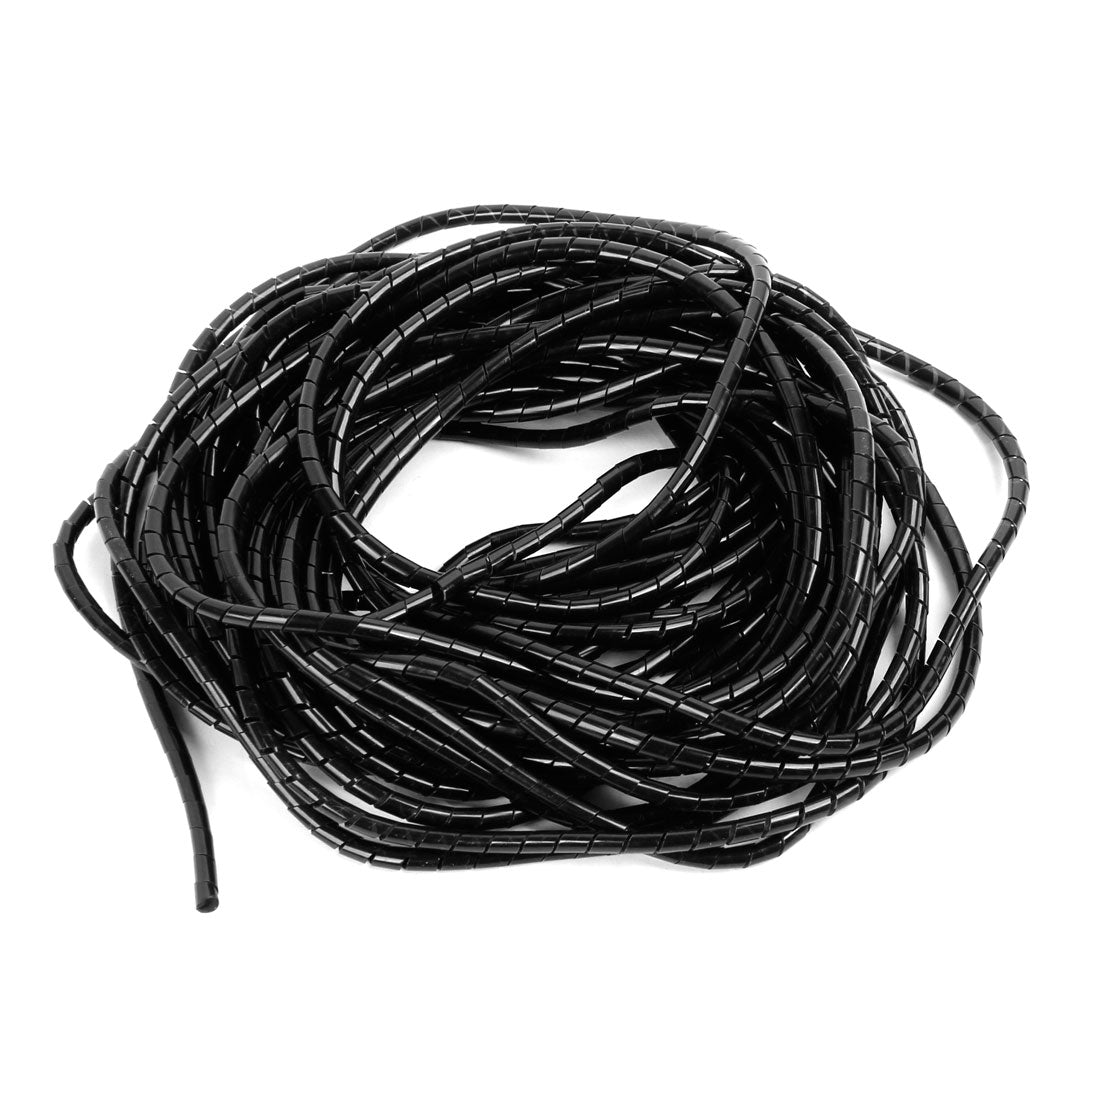 uxcell Uxcell 20M Long Flexible Black PE Polyethylene Spiral Cable Wire Wrap Tube 6mm